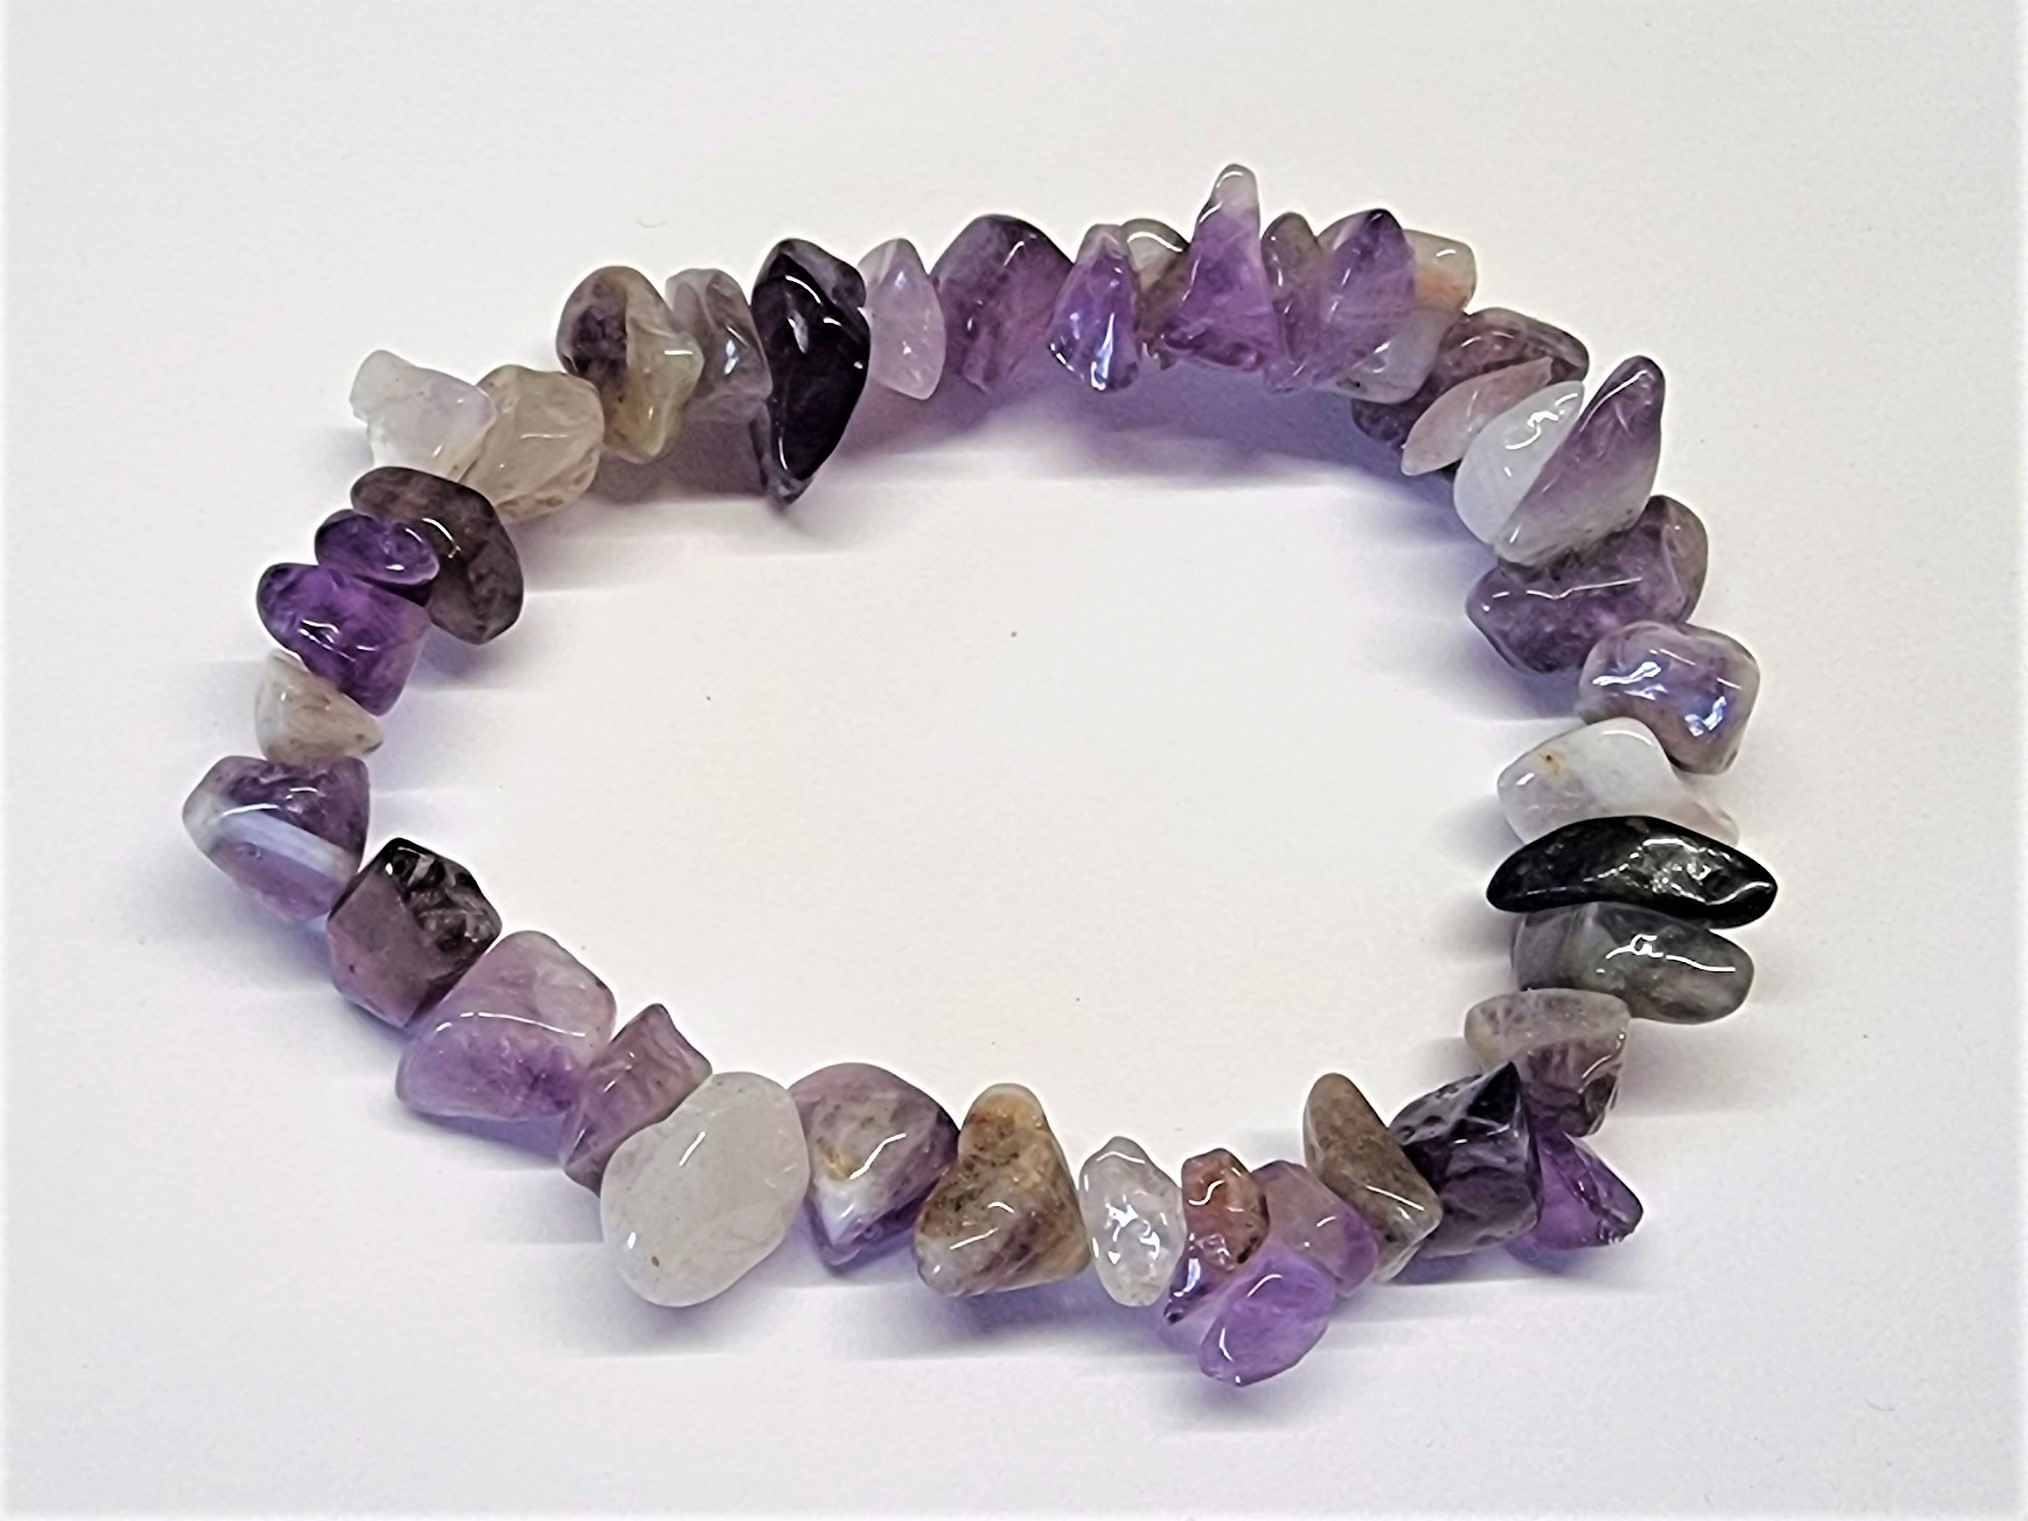 Armband Amethyst - Intuition